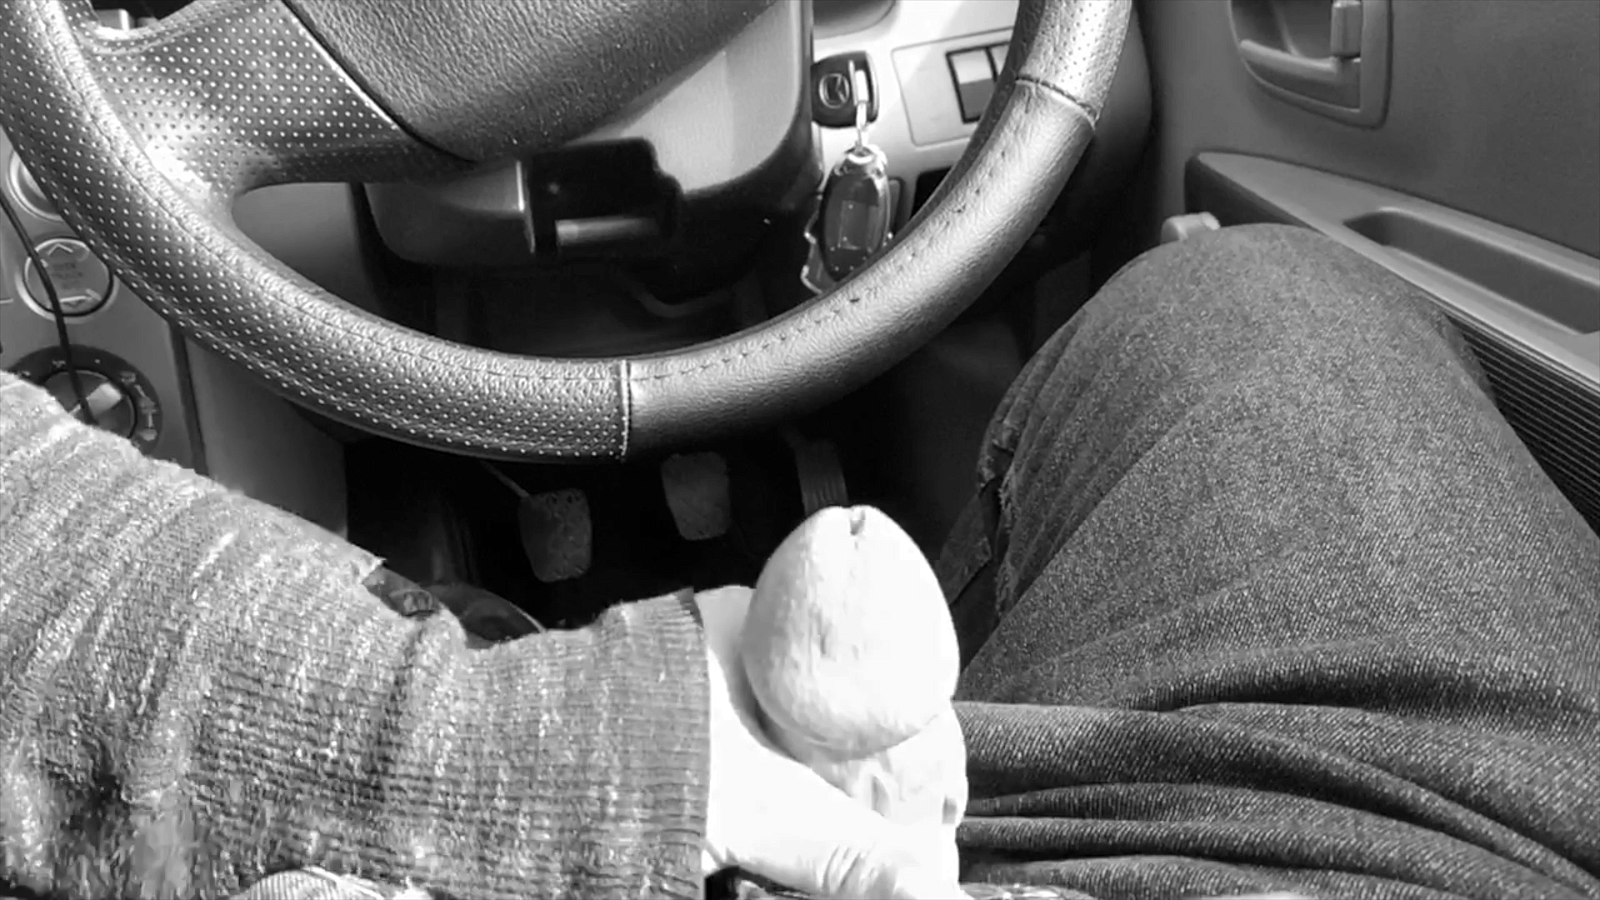 Video by Danielio with the username @Danielio, who is a verified user,  September 29, 2019 at 9:47 AM and the text says 'Naughty Jayme gives Danielio a handy little car handjob'